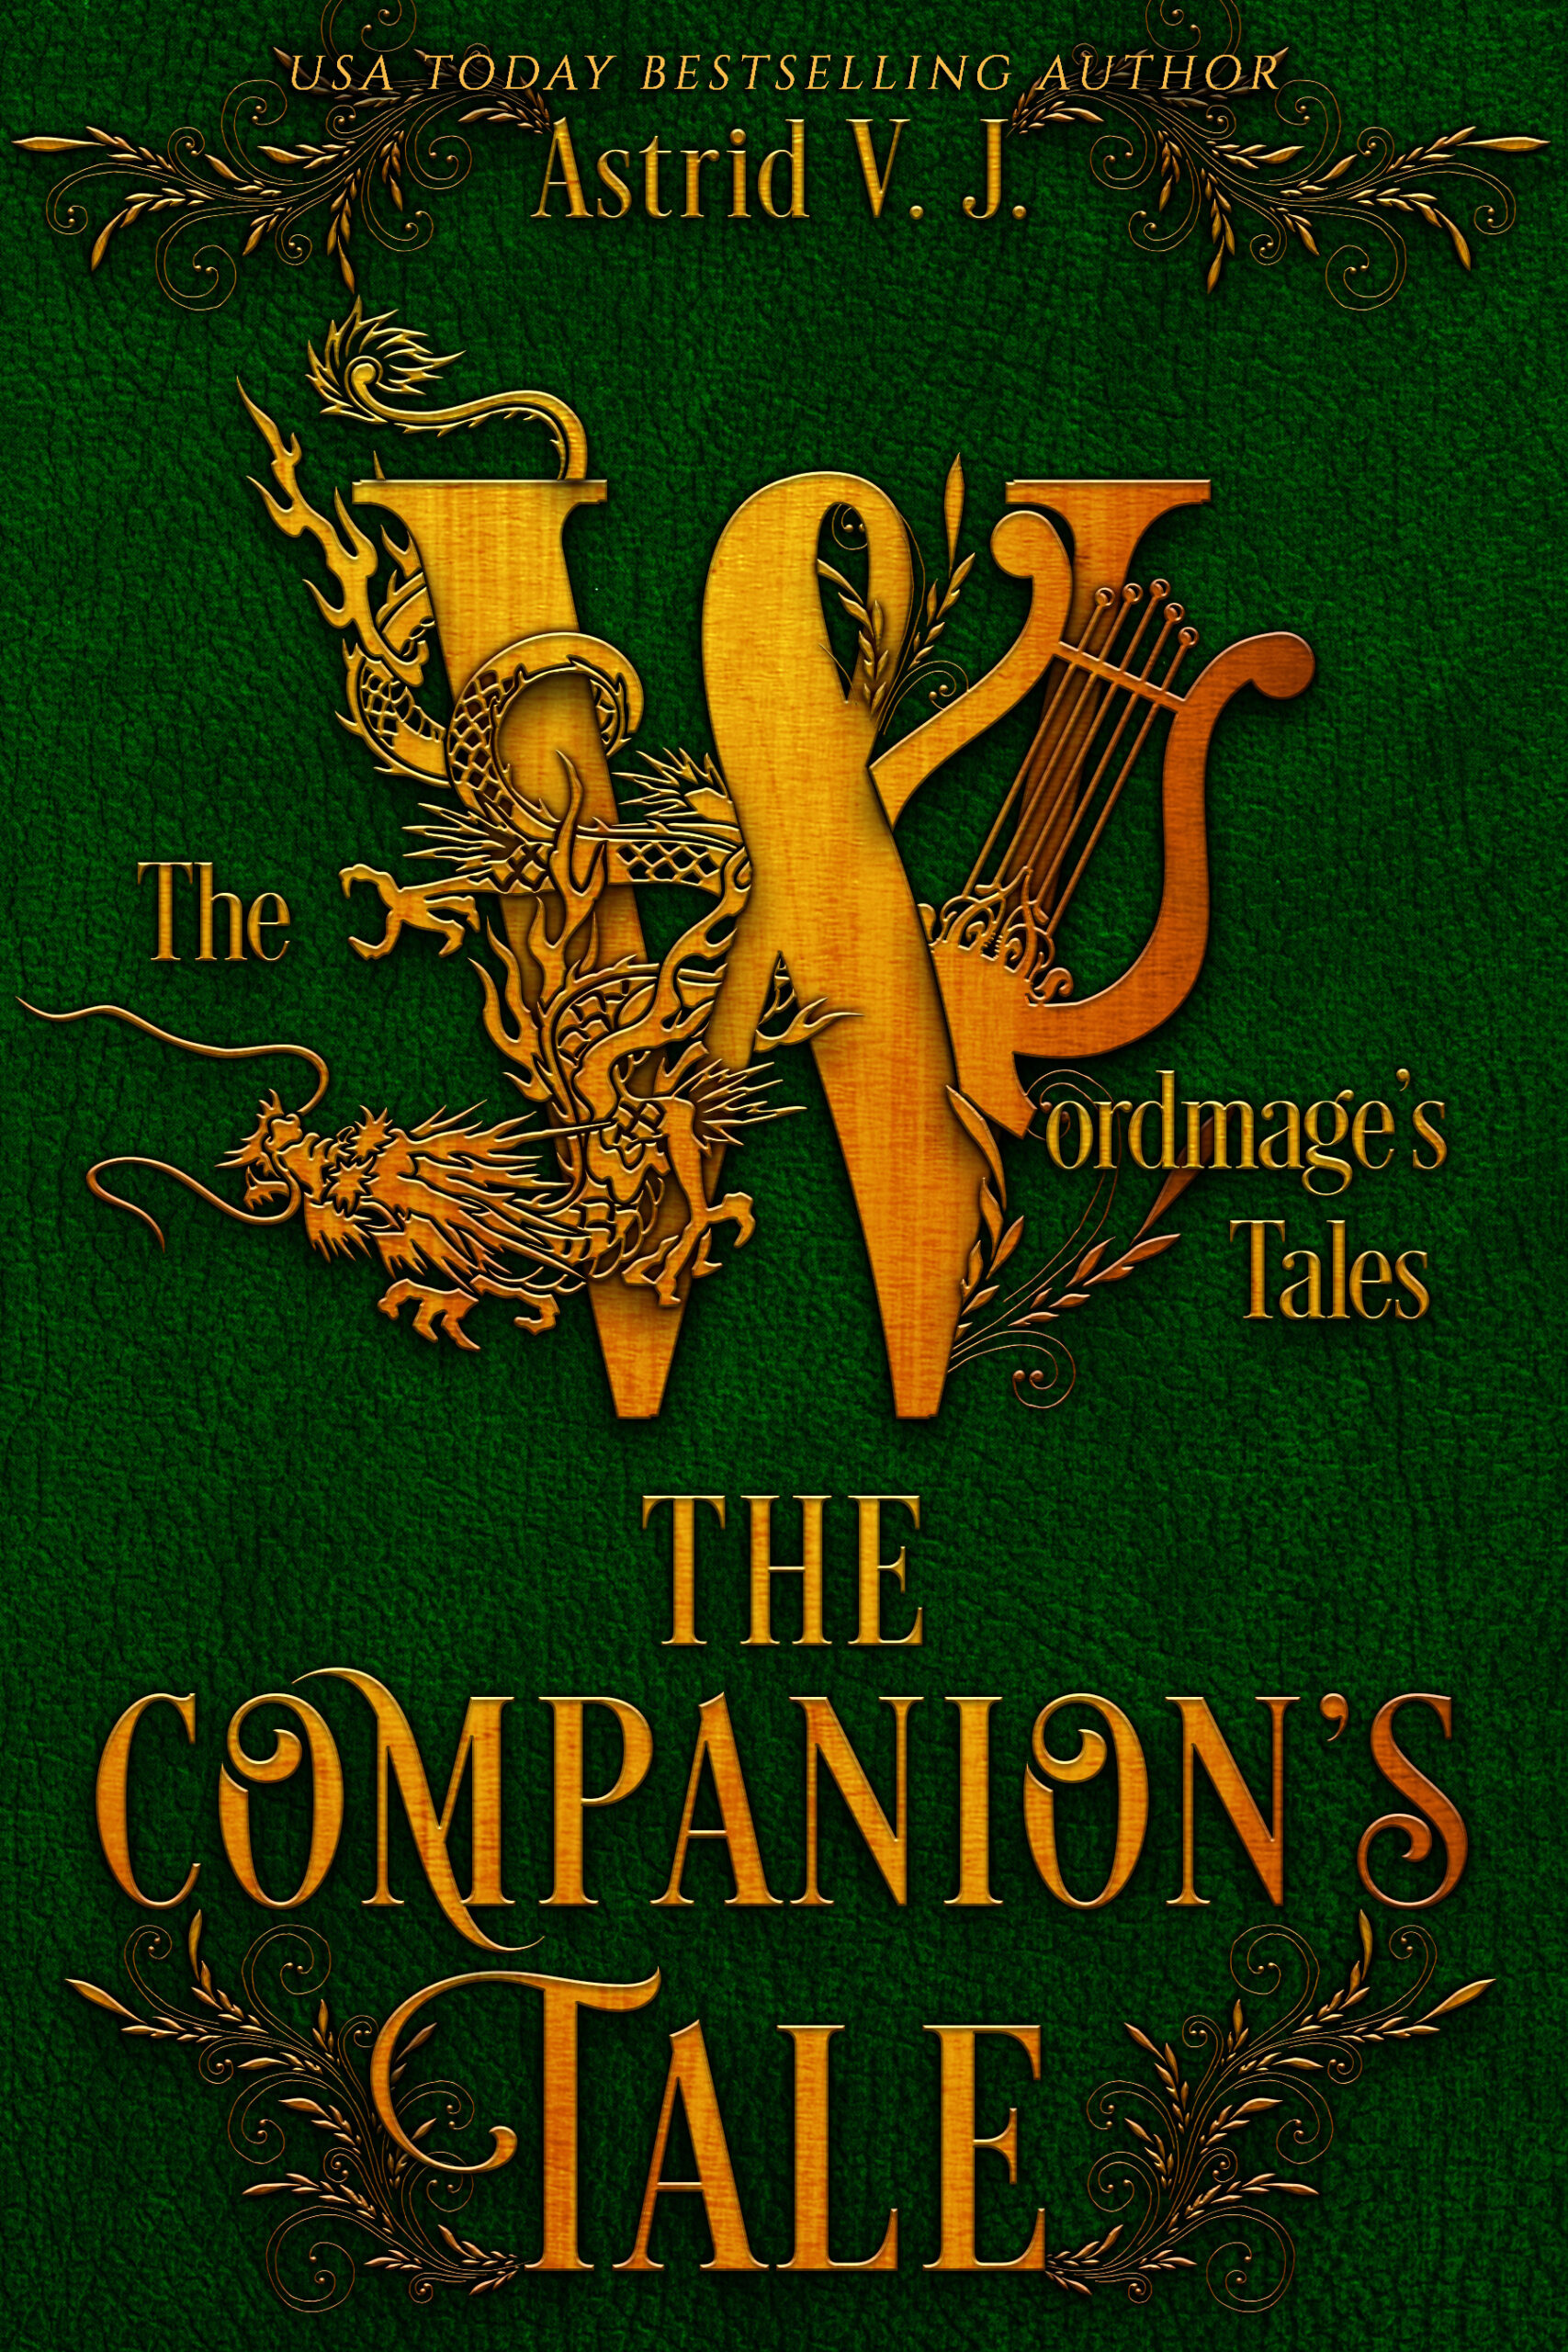 FREE: The Companion’s Tale by Astrid V.J.